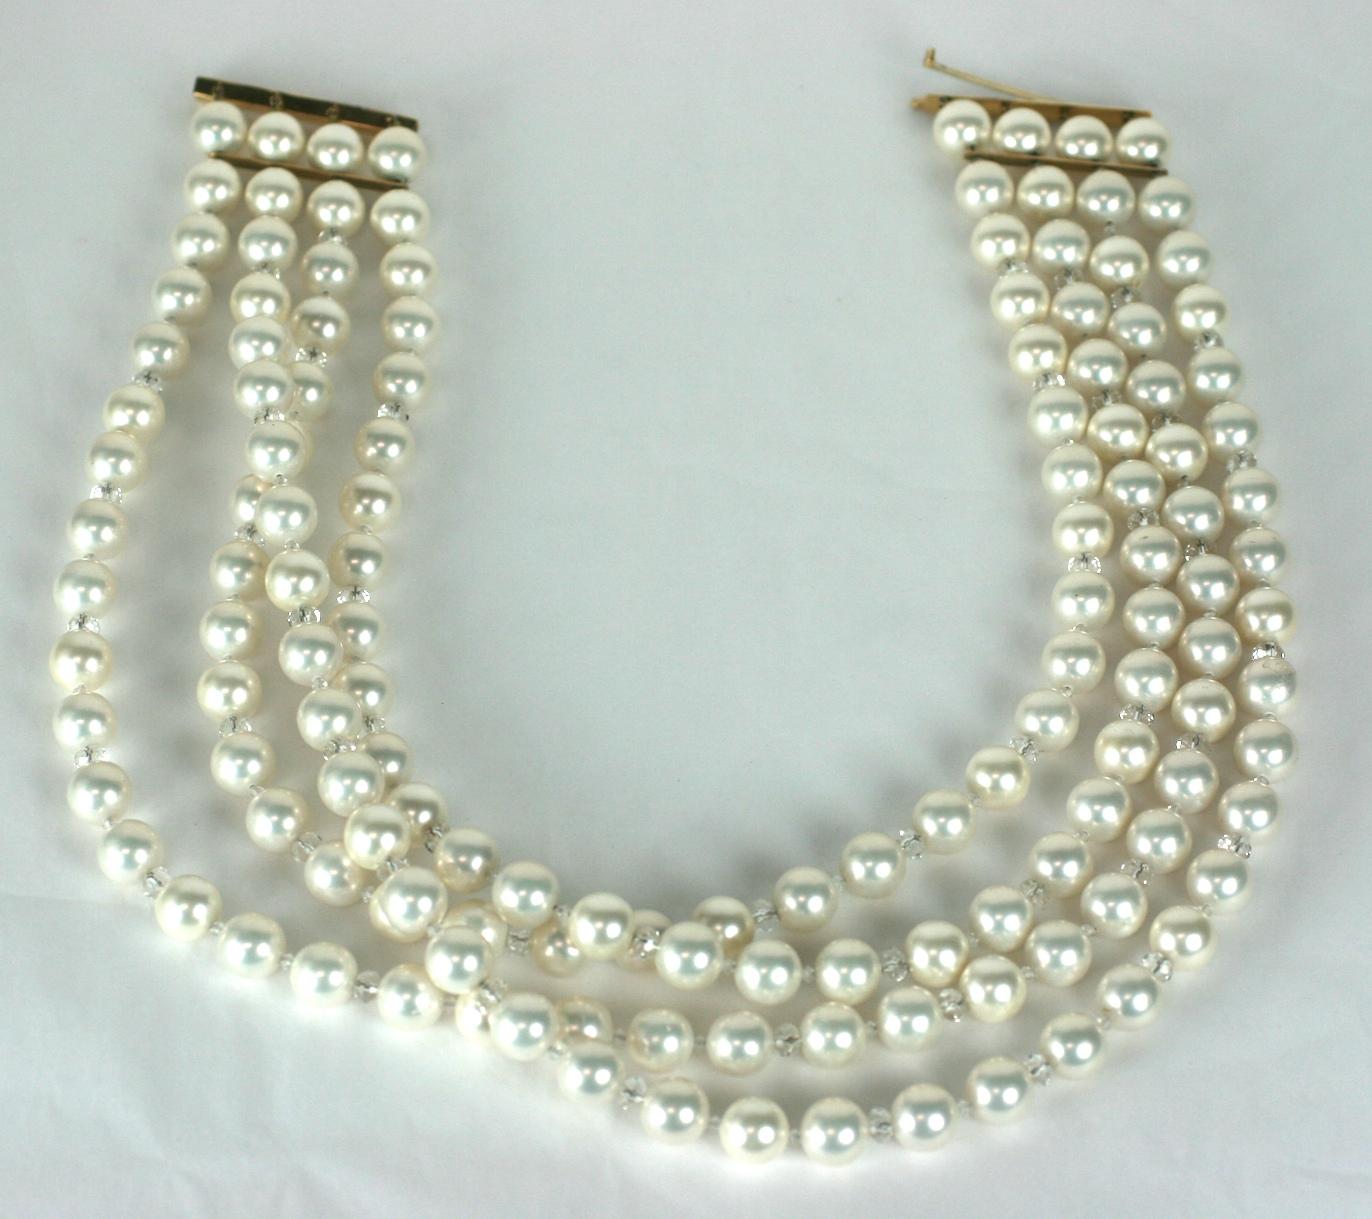 Oversized Faux Pearl and Gold Collar from the 1980's. Custom made necklace with 4 strands of oversized 10mm faux pearls (which are quite weighty as they are likely mother of pearl beads with a nacre coating). 
These pearl beads are all strung with